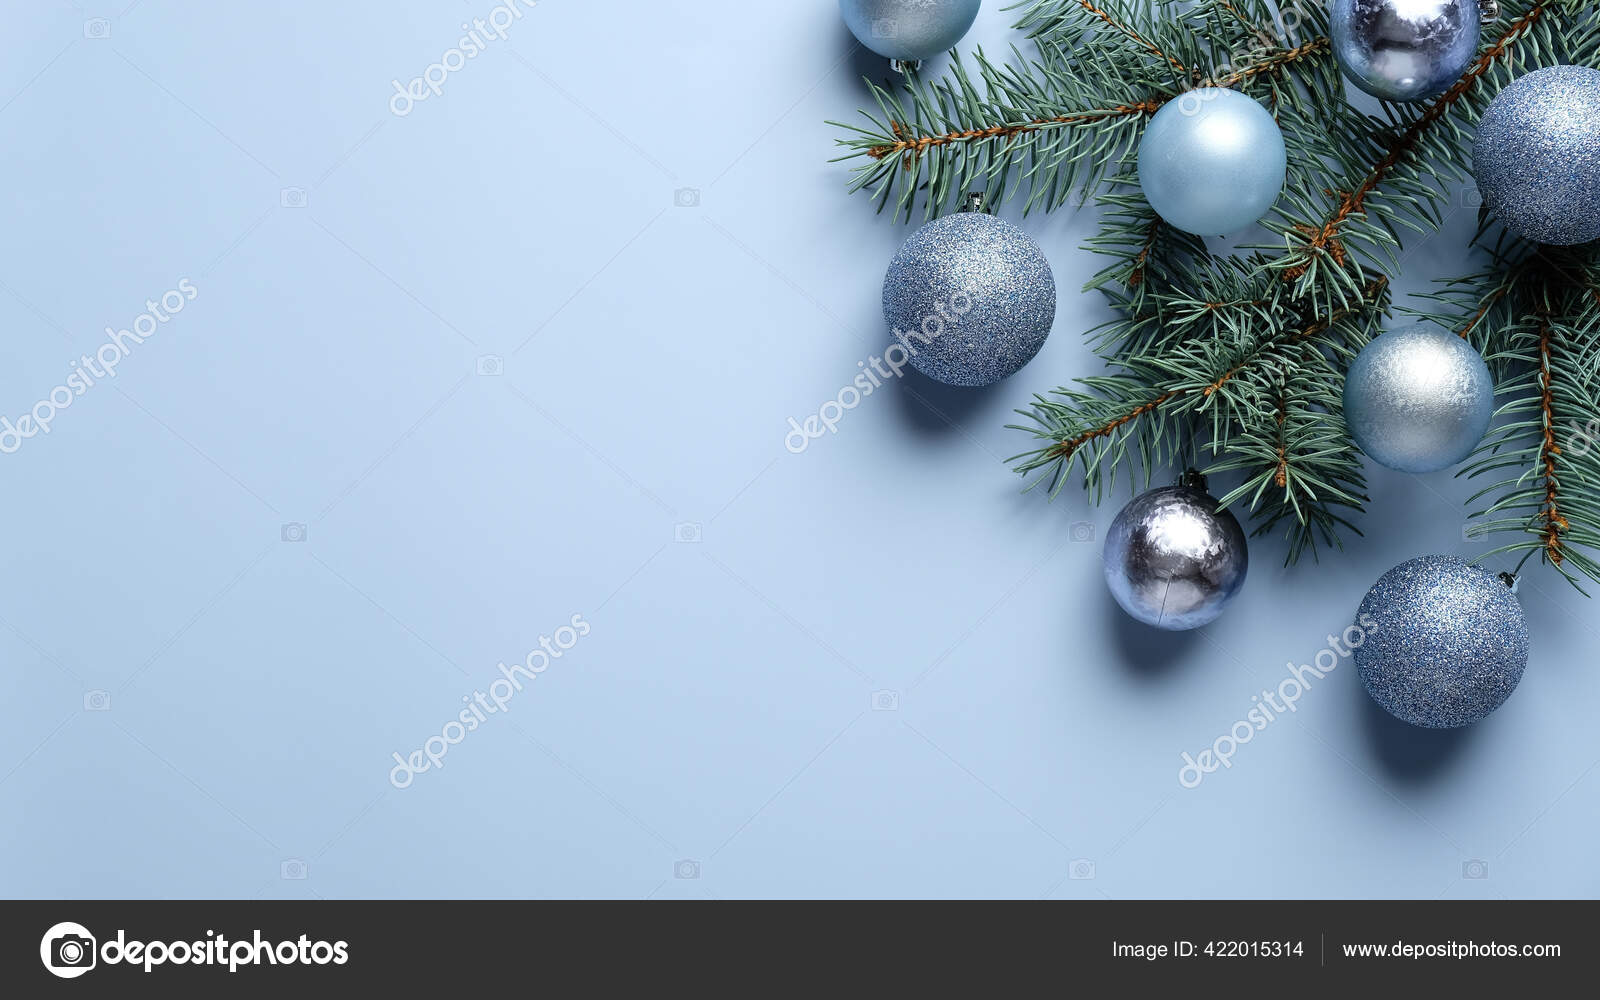 Festive Christmas Decorations with Pine Tree Branches and Silver Balls